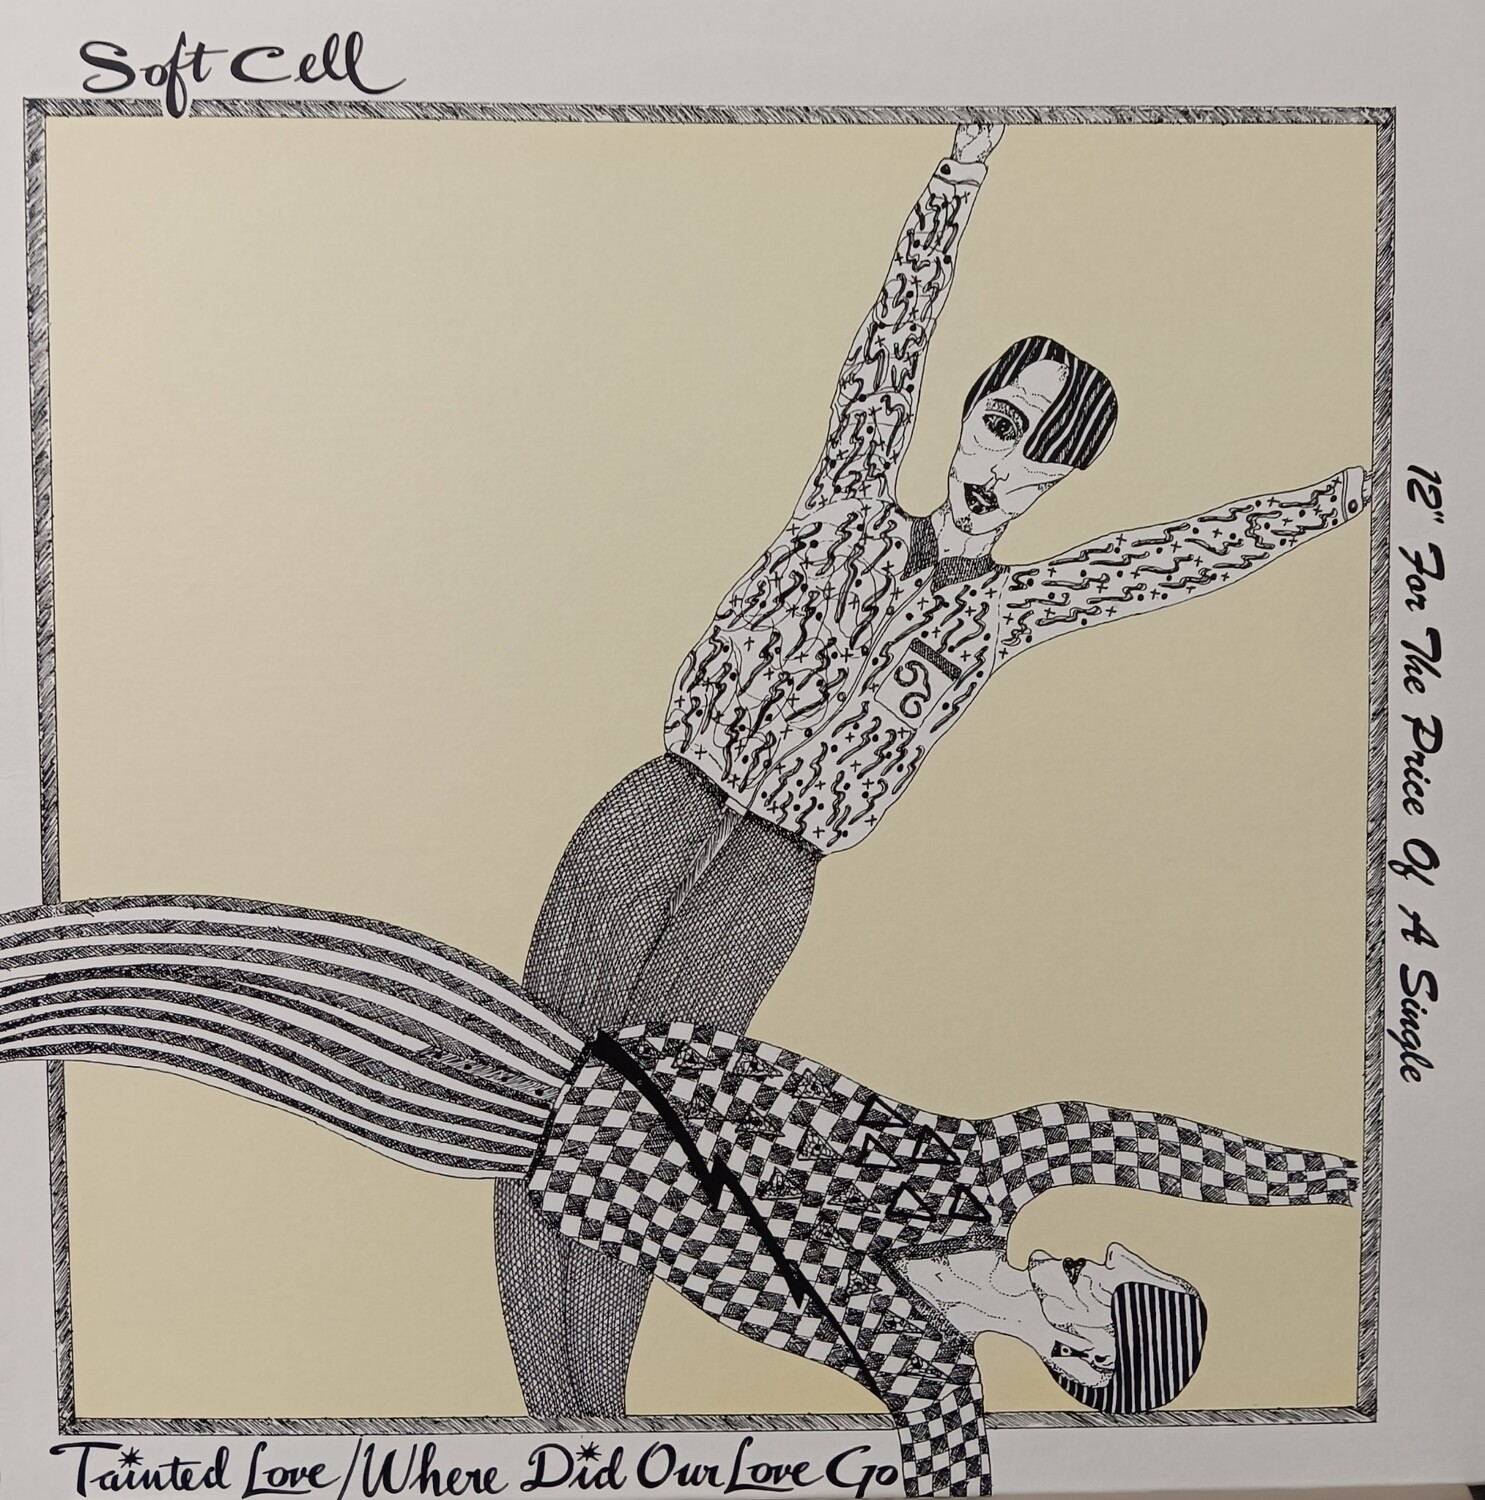 SOFT CELL - Tainted Love (MAXI)